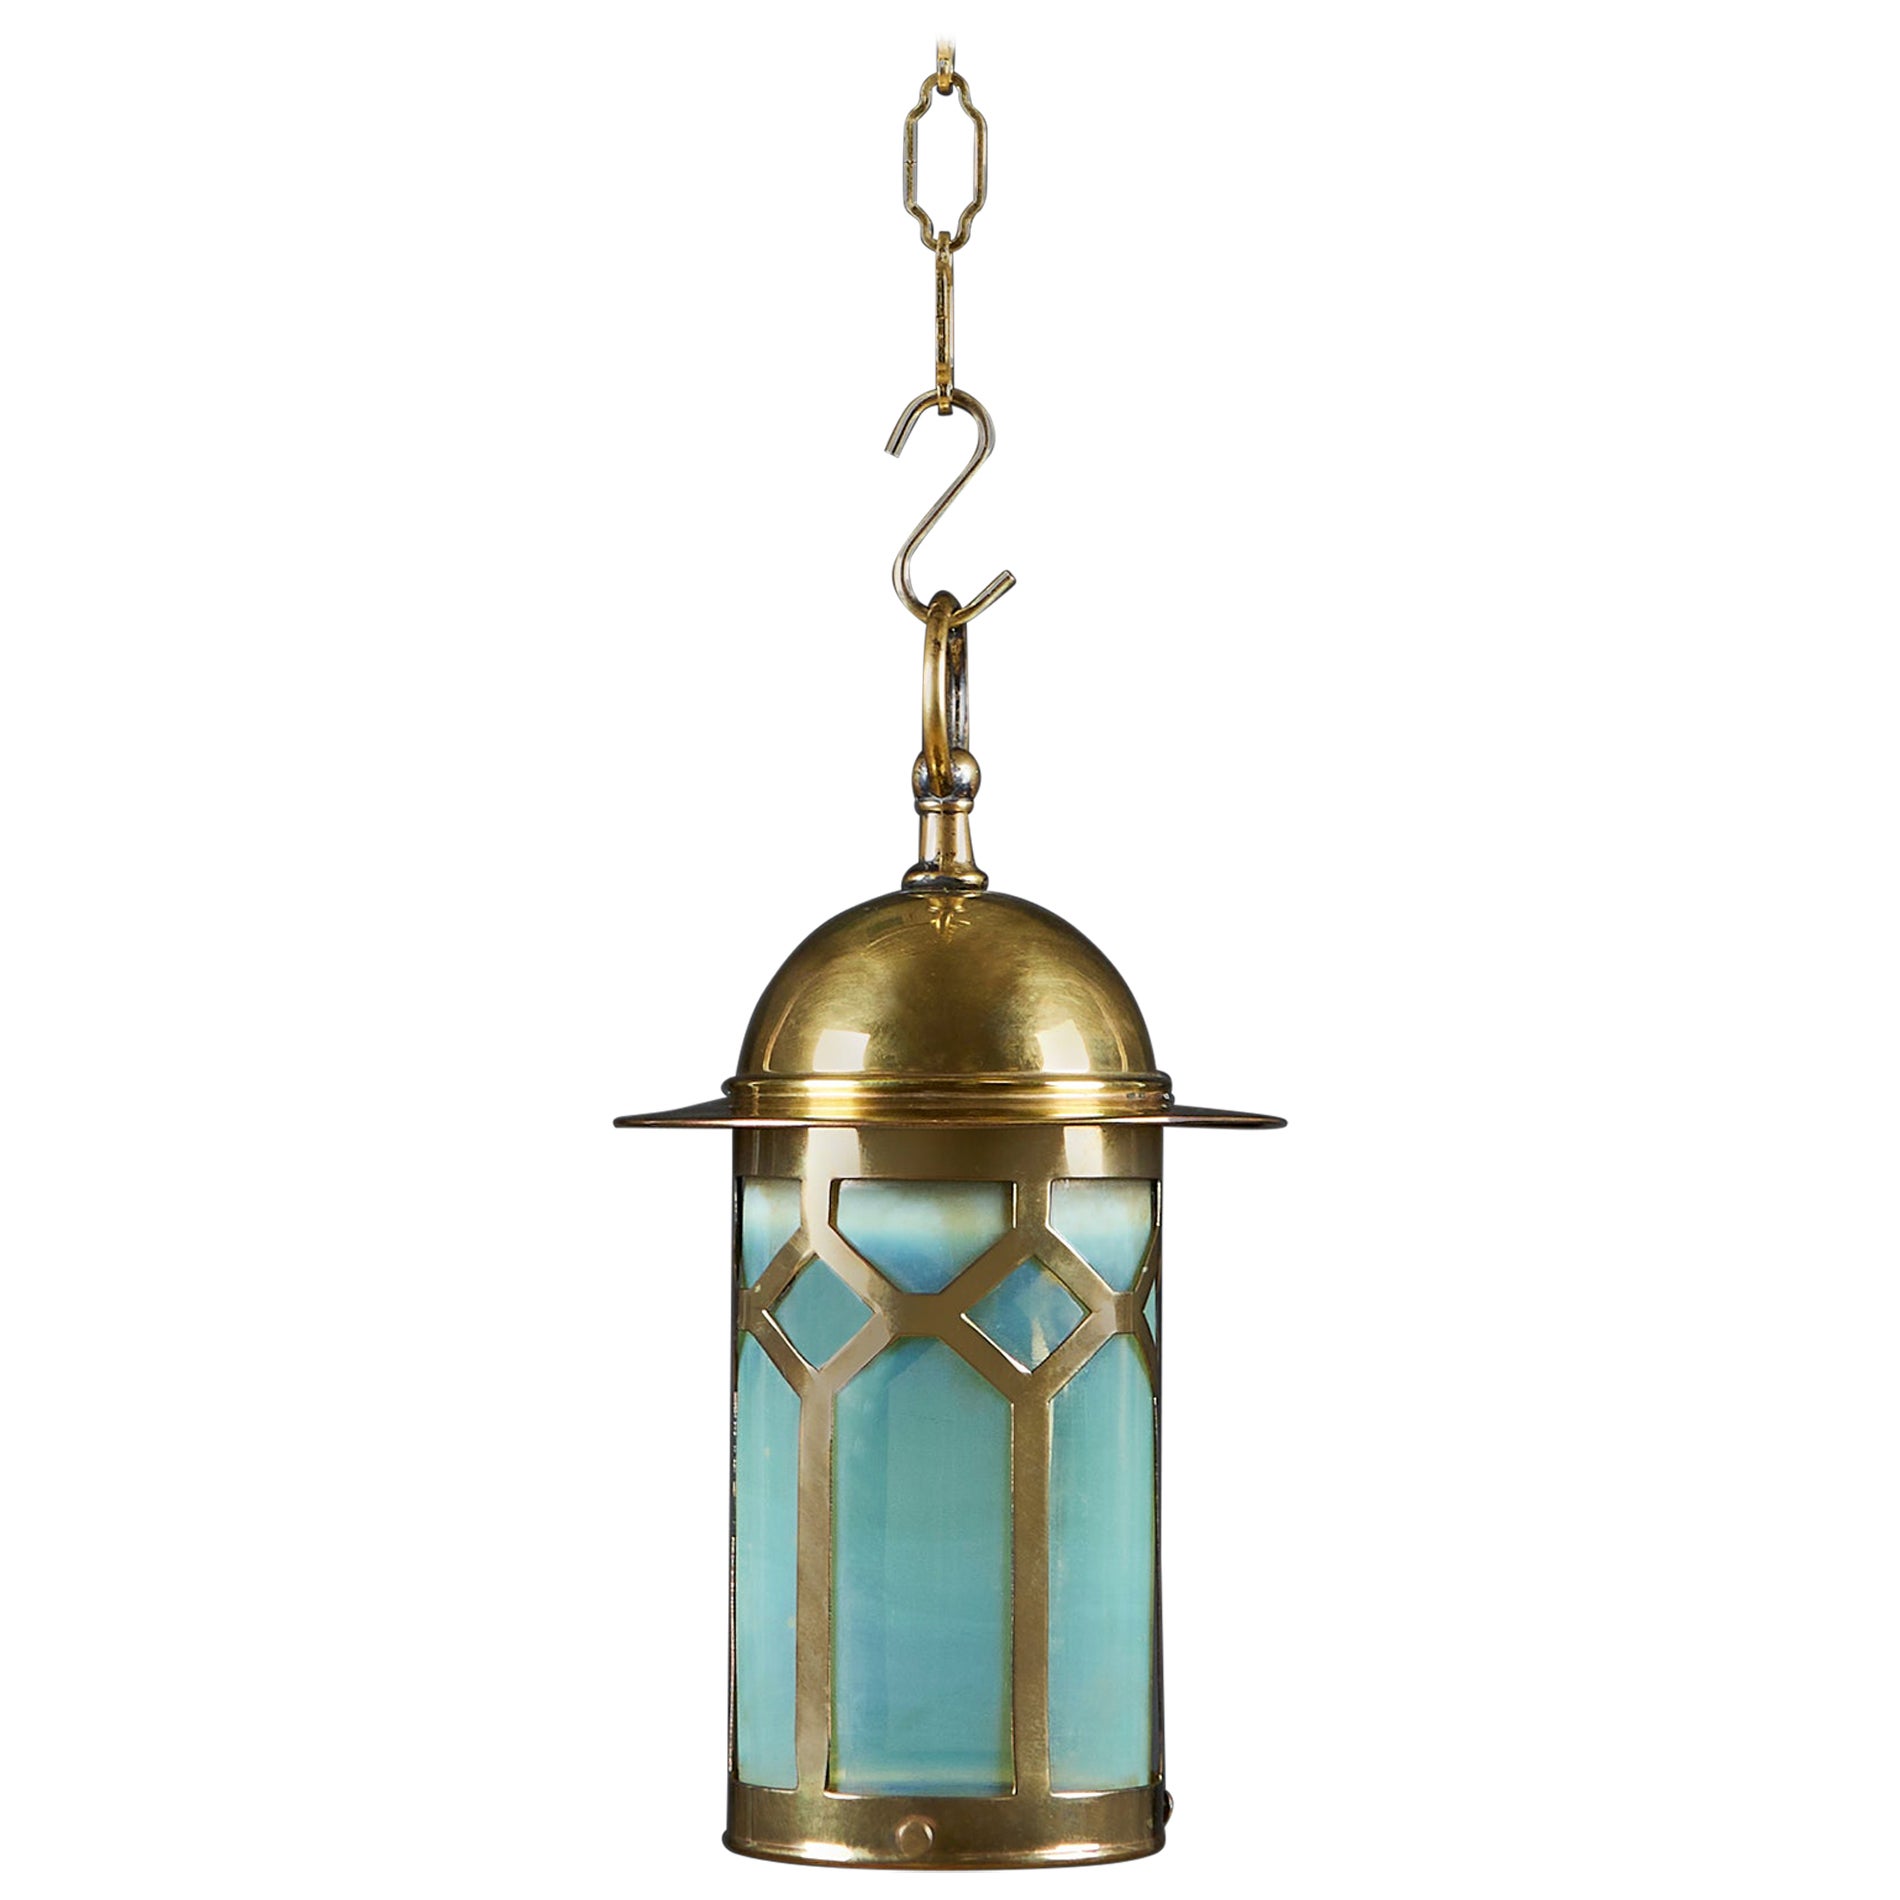 A Brass Arts and Crafts Hanging Lantern with Opaline Glass, of Small Scale